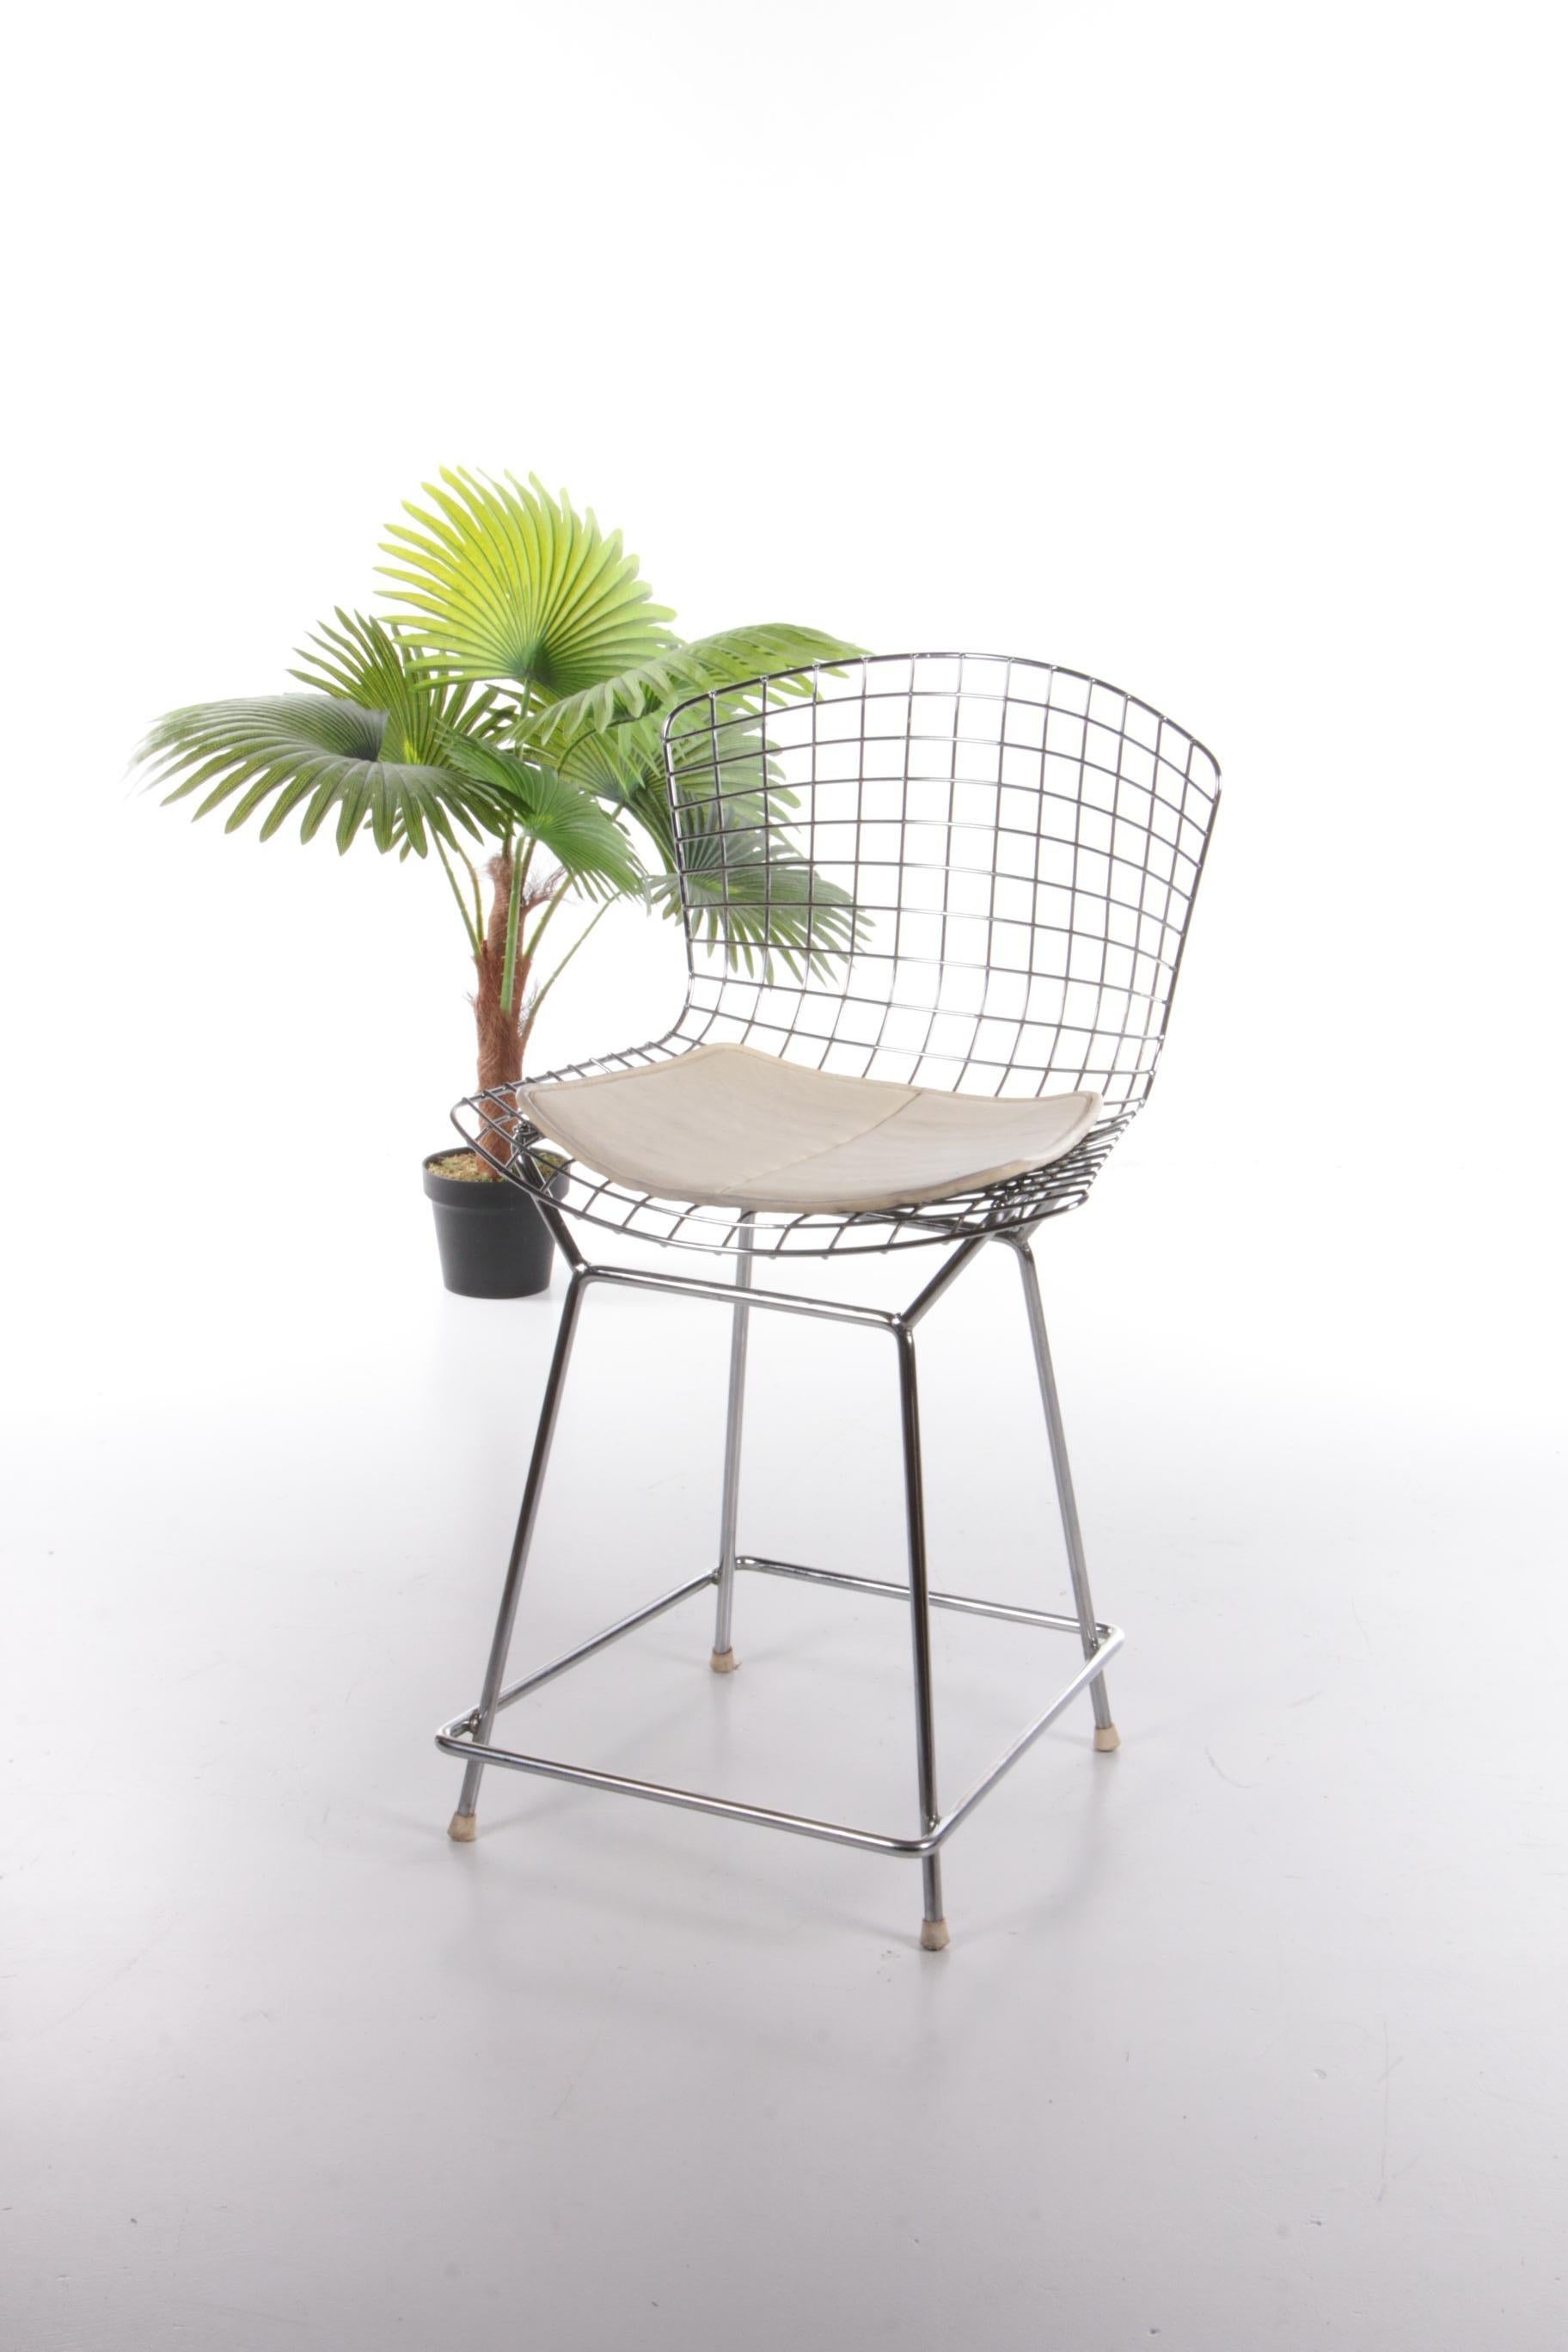 Knoll Bertoia bar stool with beautiful original cushion, 1970


The Bertoia side chair is available with a seat cushion. The frame is a welded steel construction with bars in chrome or bonded Rilsan.

The designer is Harry Bertoia and the